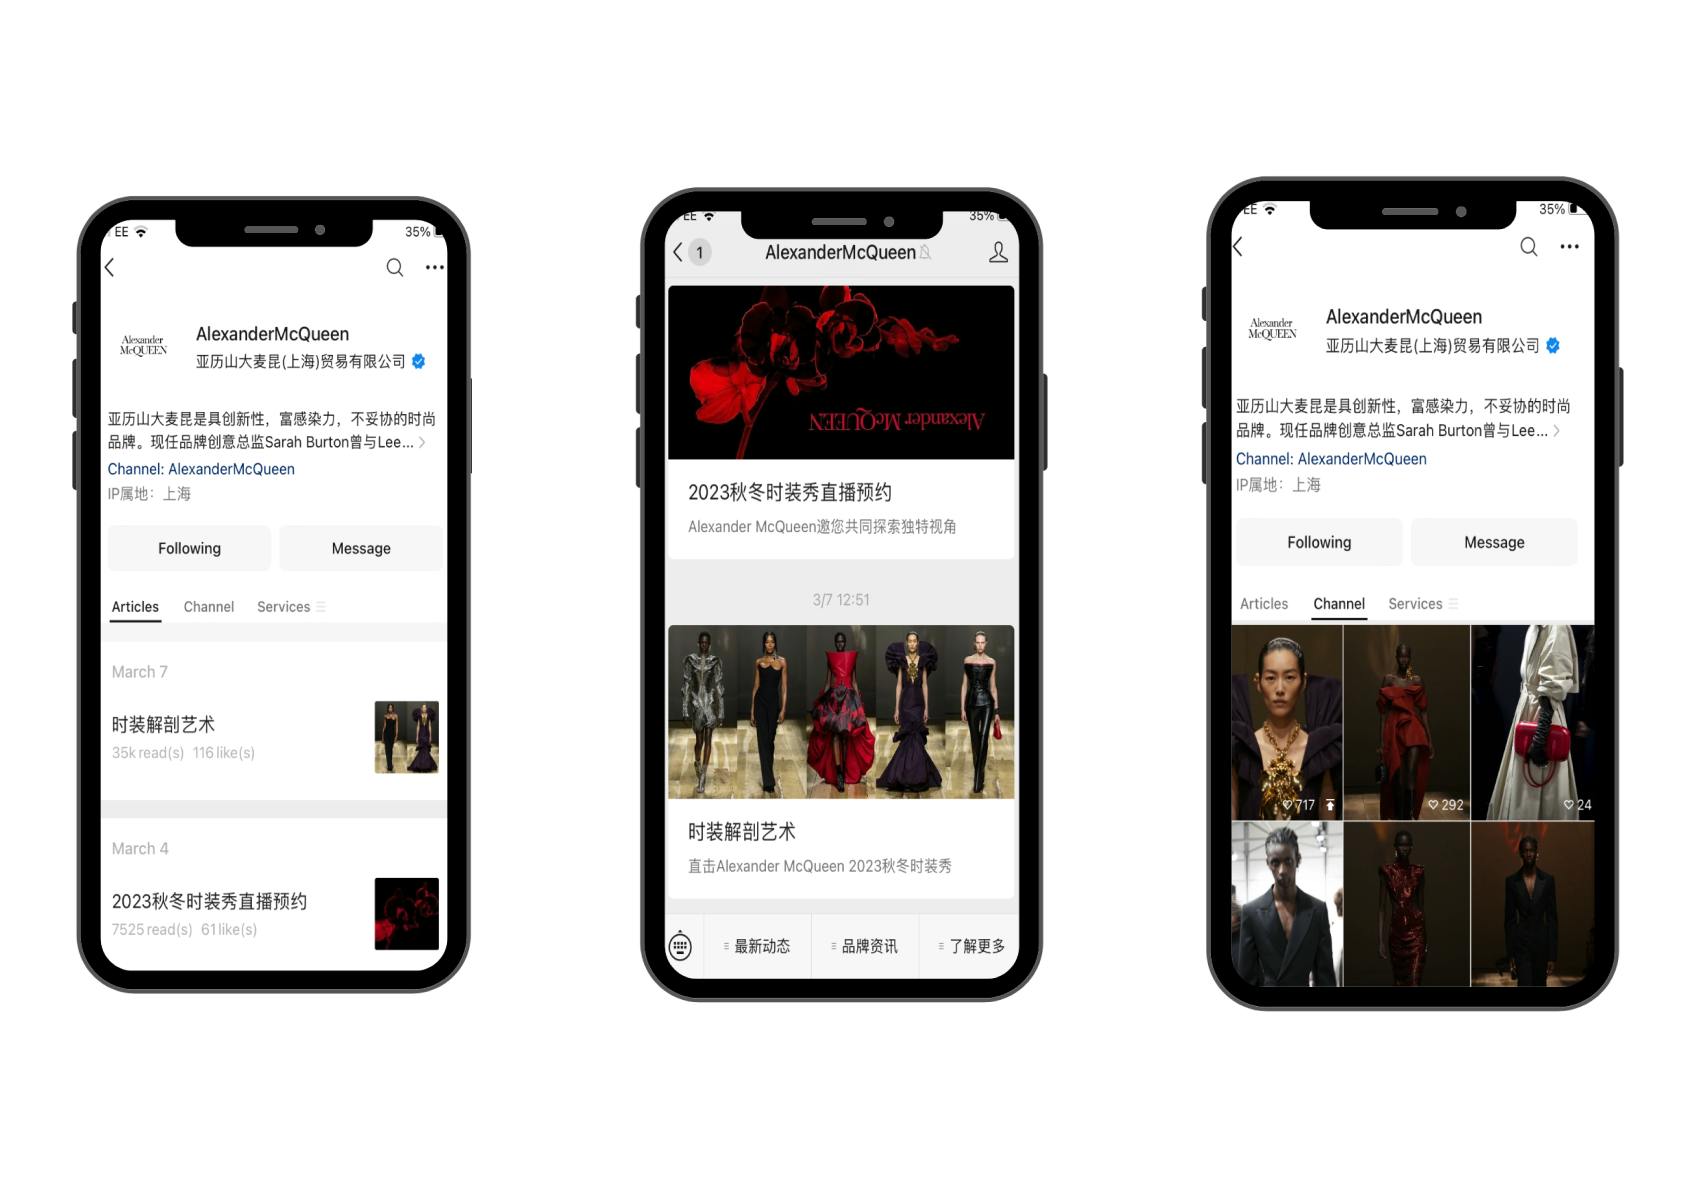 WeChat Article & Video Channel